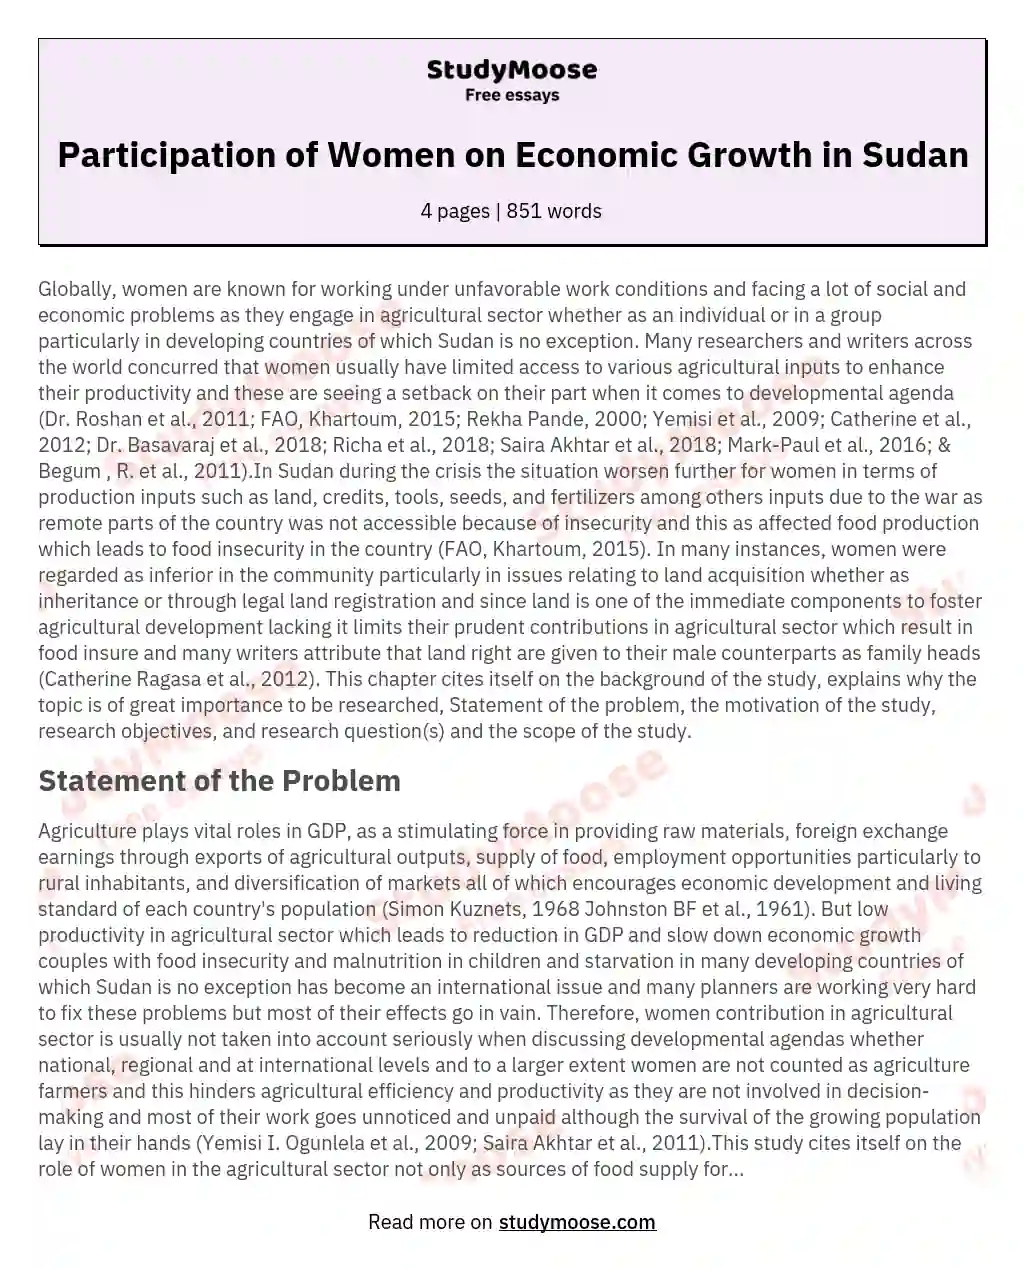 Participation of Women on Economic Growth in Sudan essay